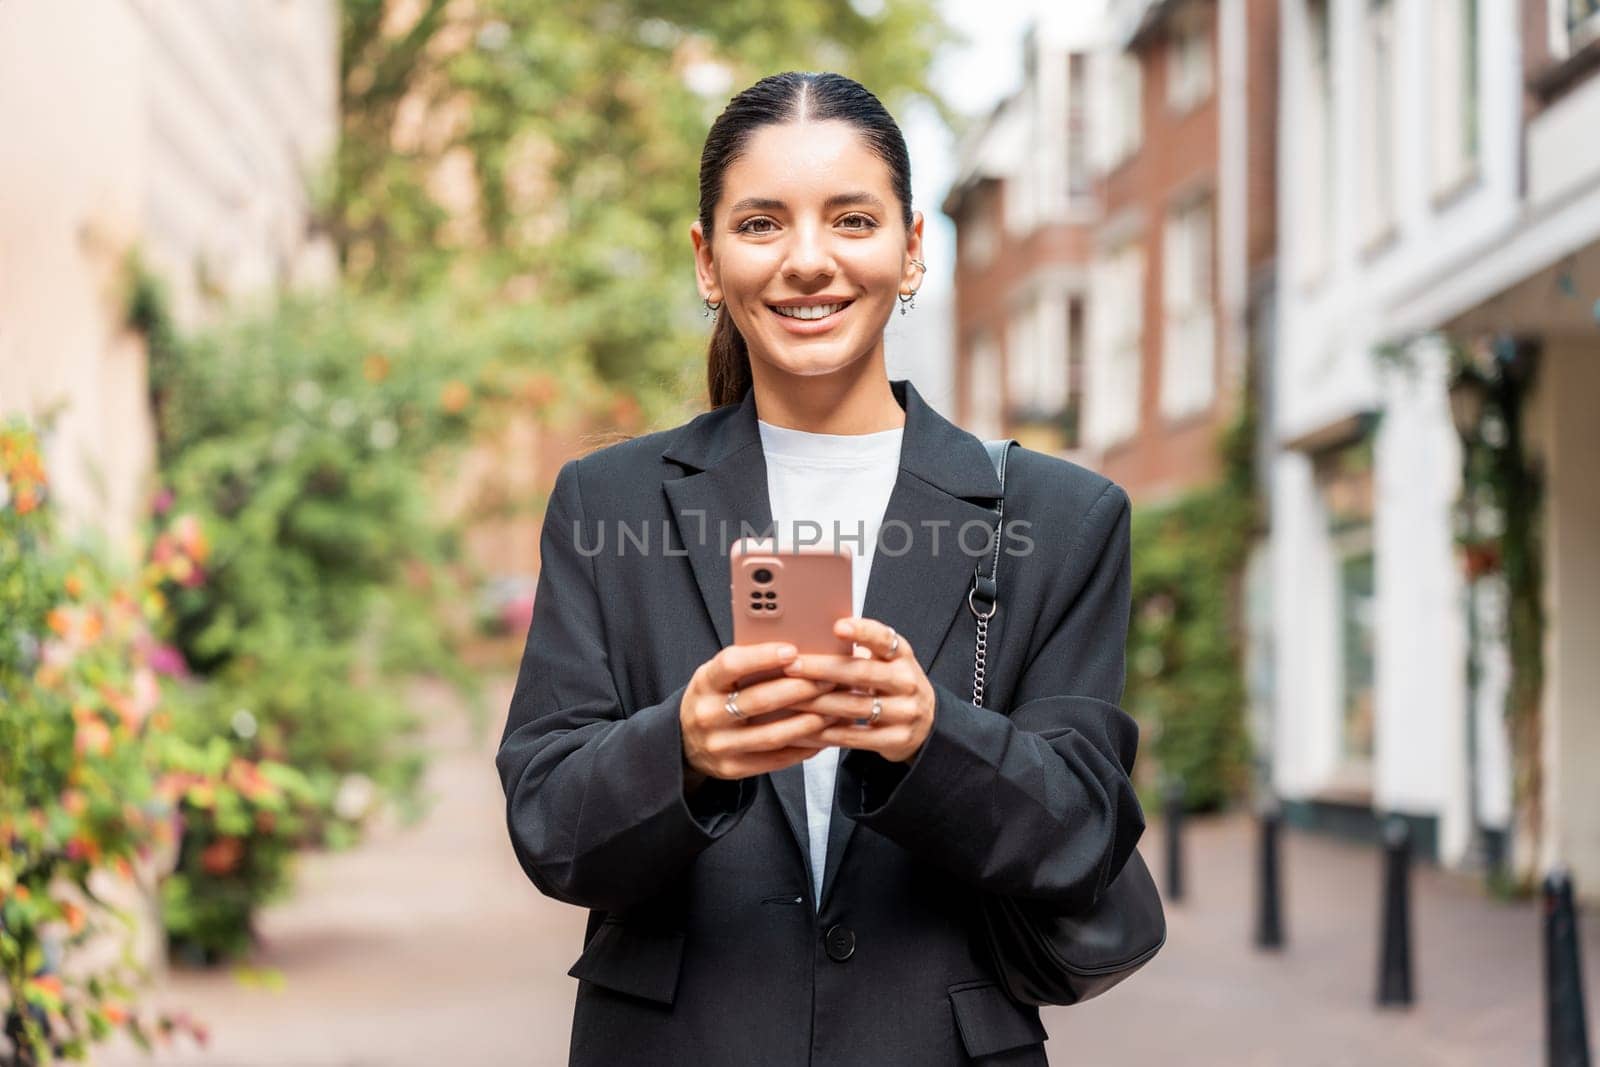 Sunny portrait of a newly entrepreneur young woman in her 25s, black suit, holding a phone smiling, looking in camera by AndreiDavid